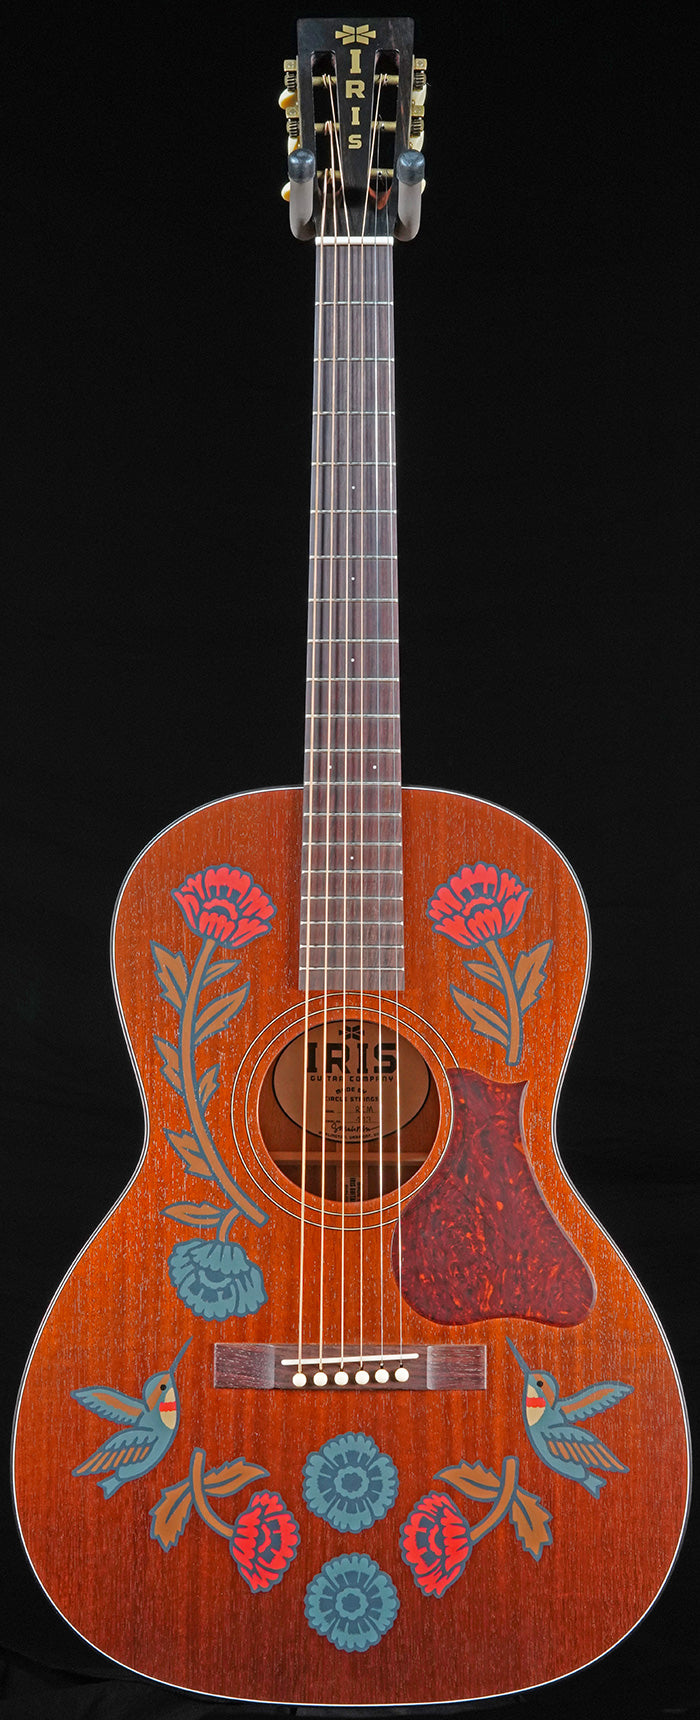 Ltd. Edition RCM Hand Painted Top